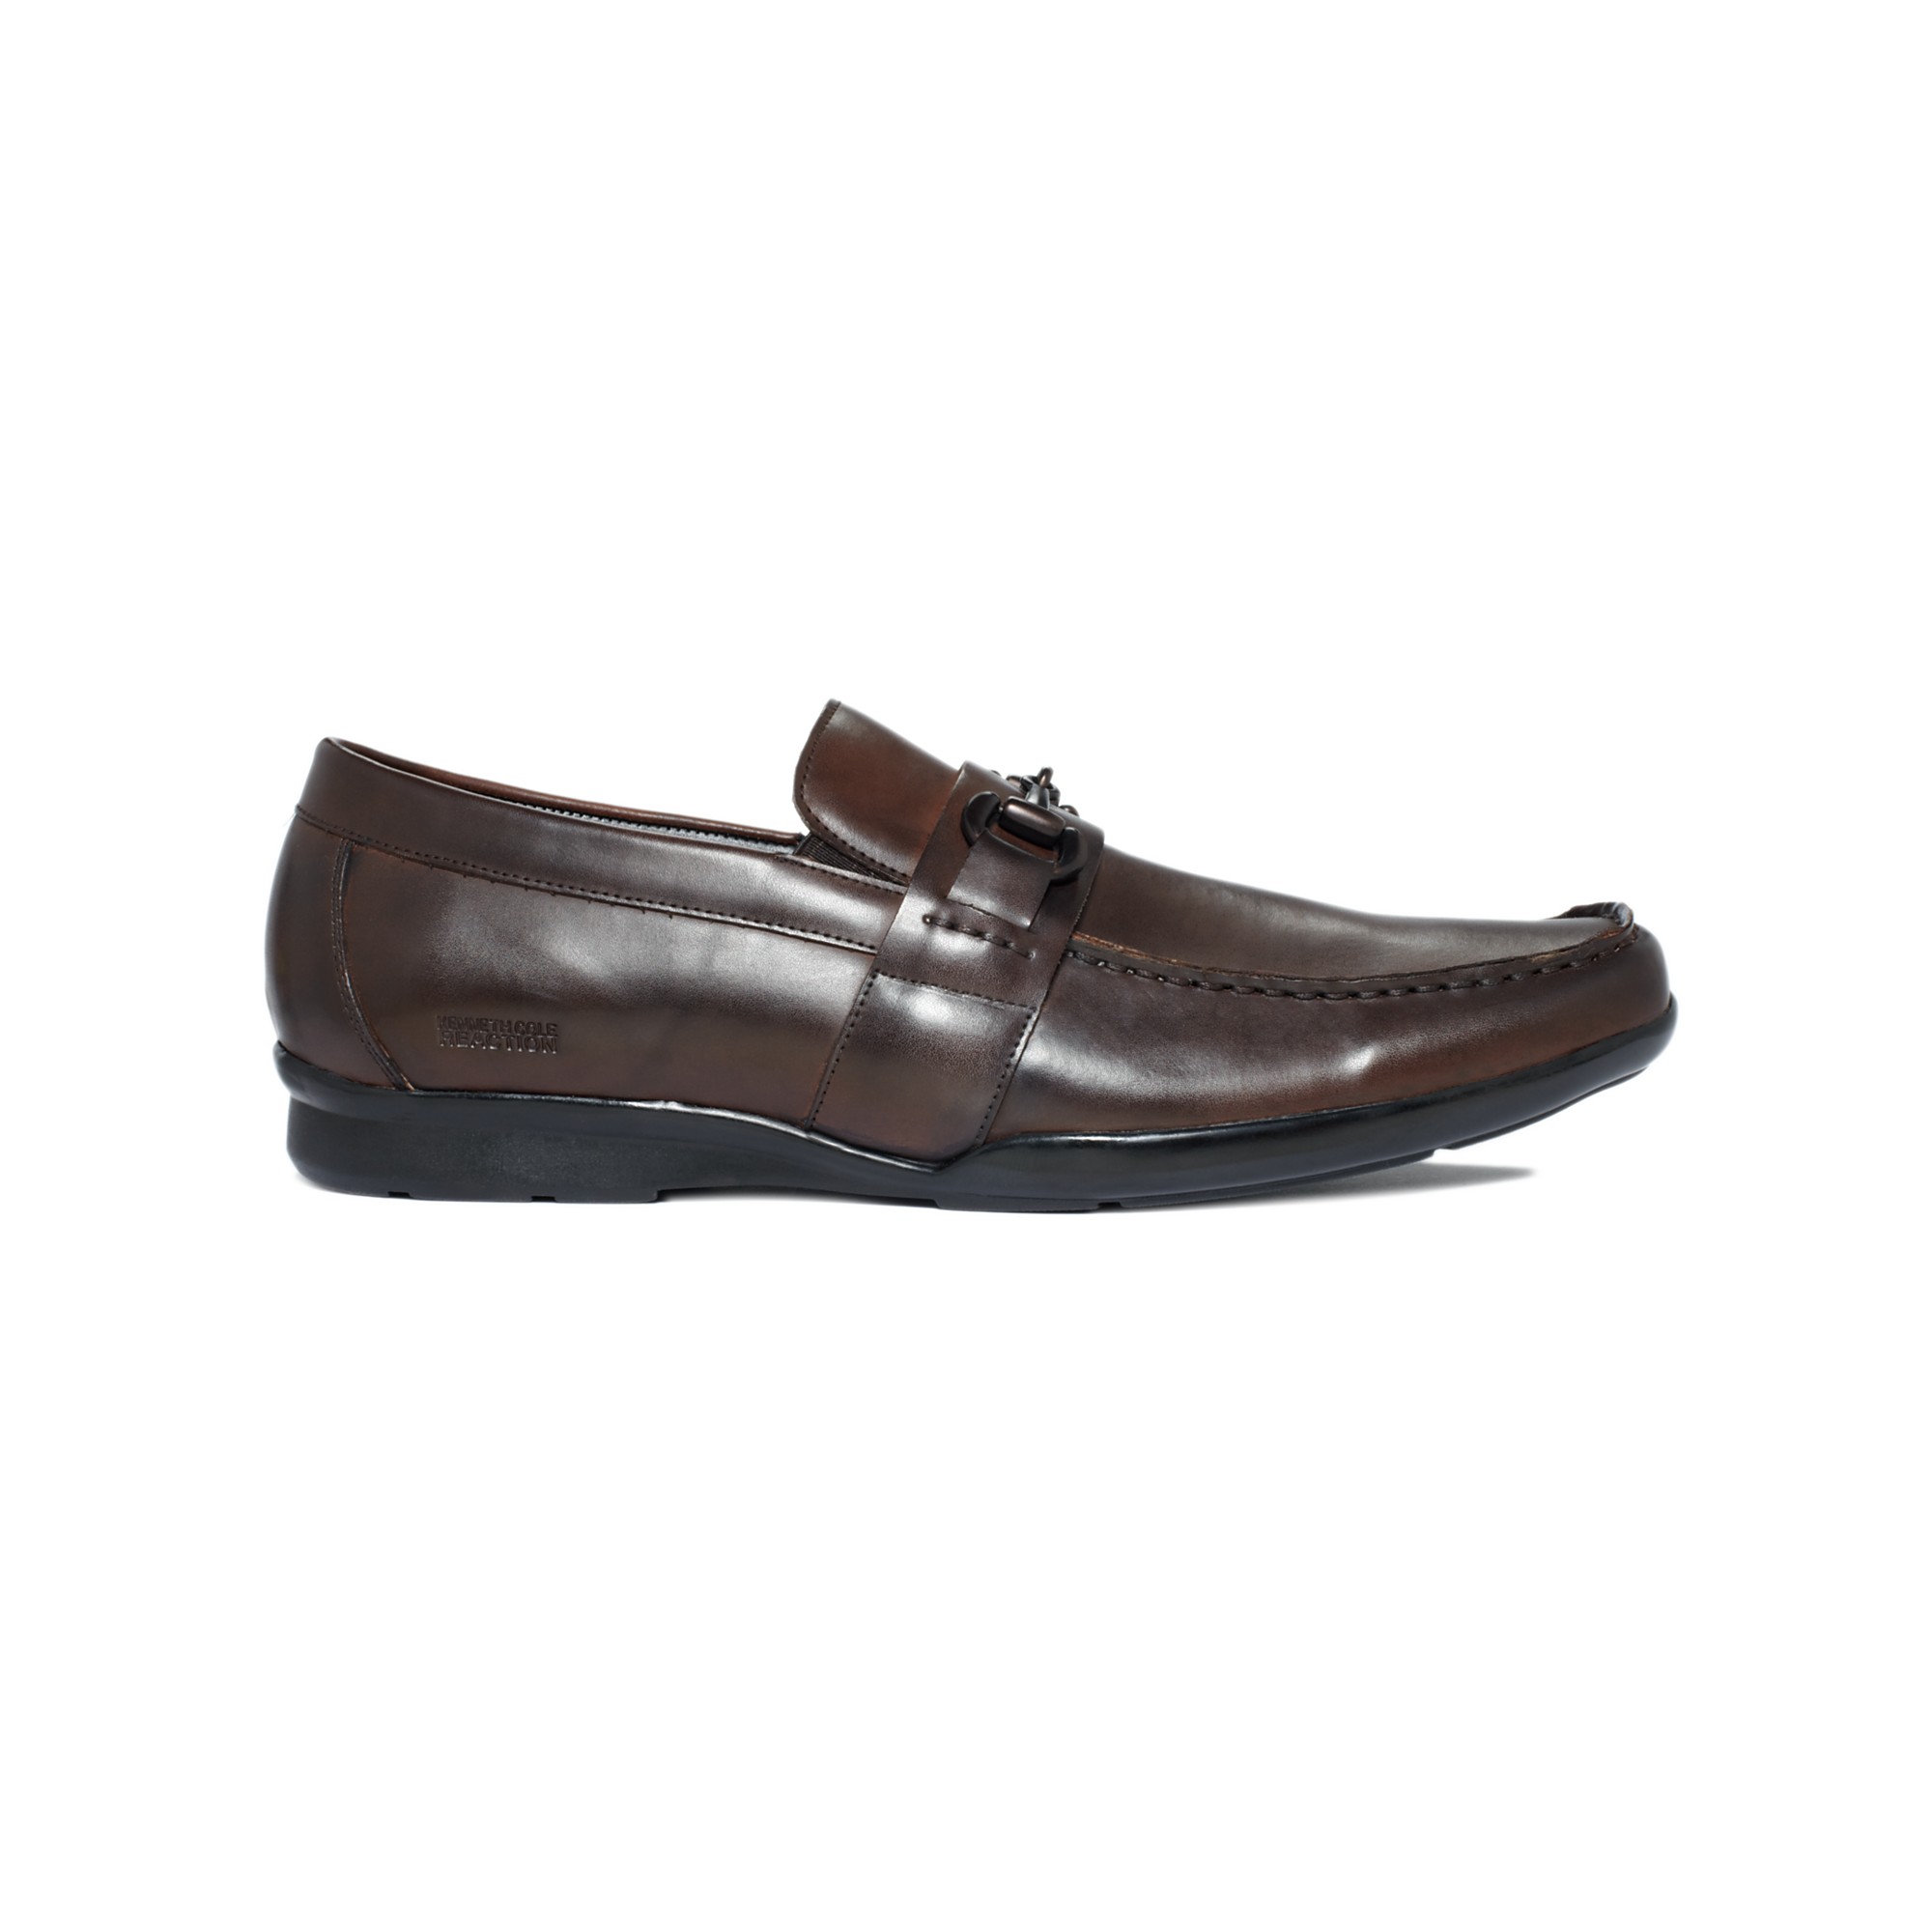 Lyst - Kenneth Cole Reaction Plane Side Bit Loafers in Brown for Men